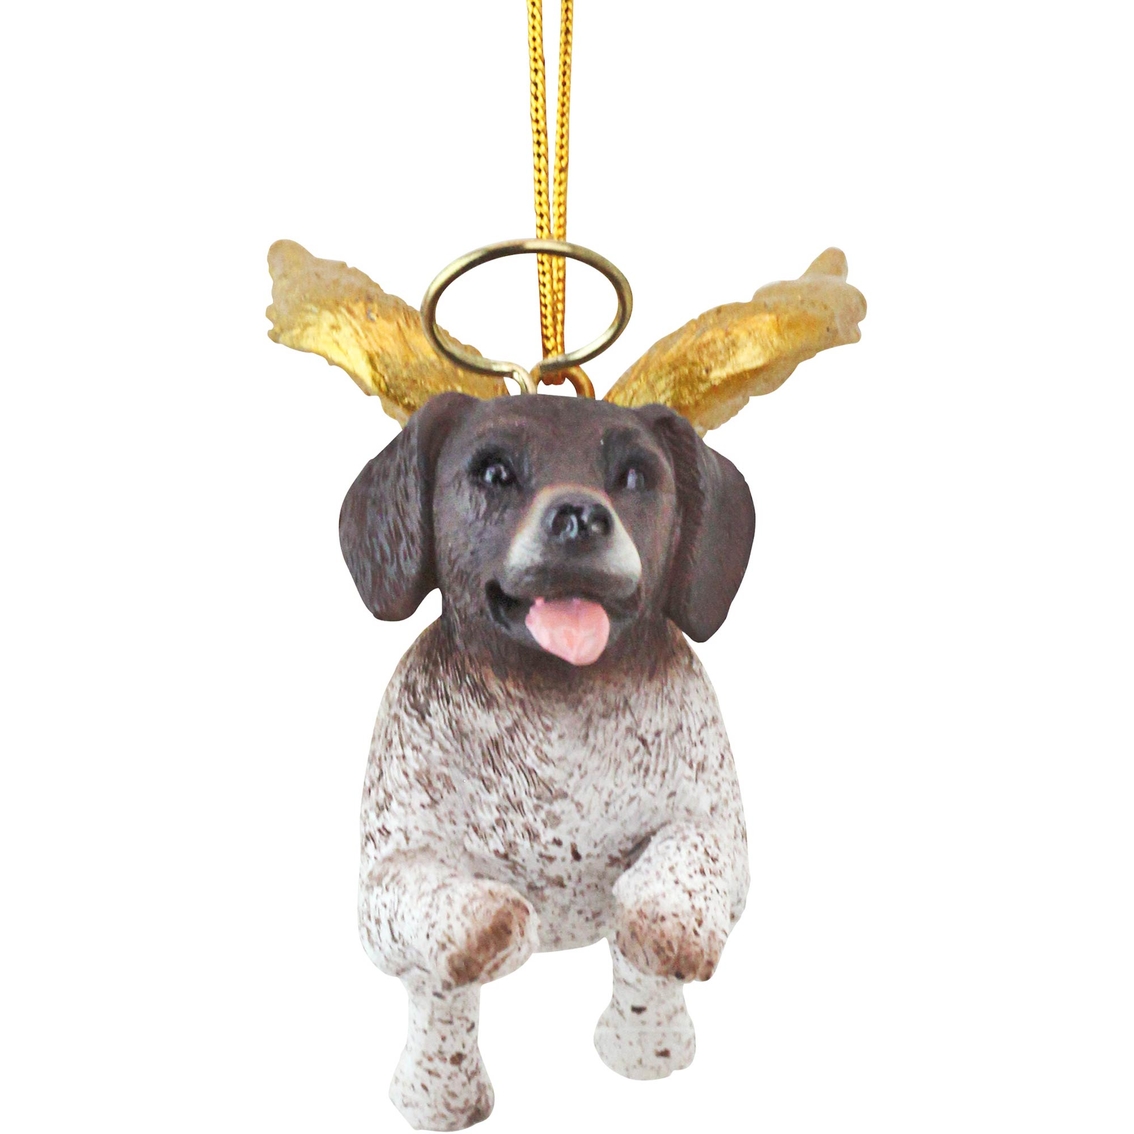 Design Toscano Honor the Pooch Pointer Holiday Dog Angel Ornament - Image 4 of 4